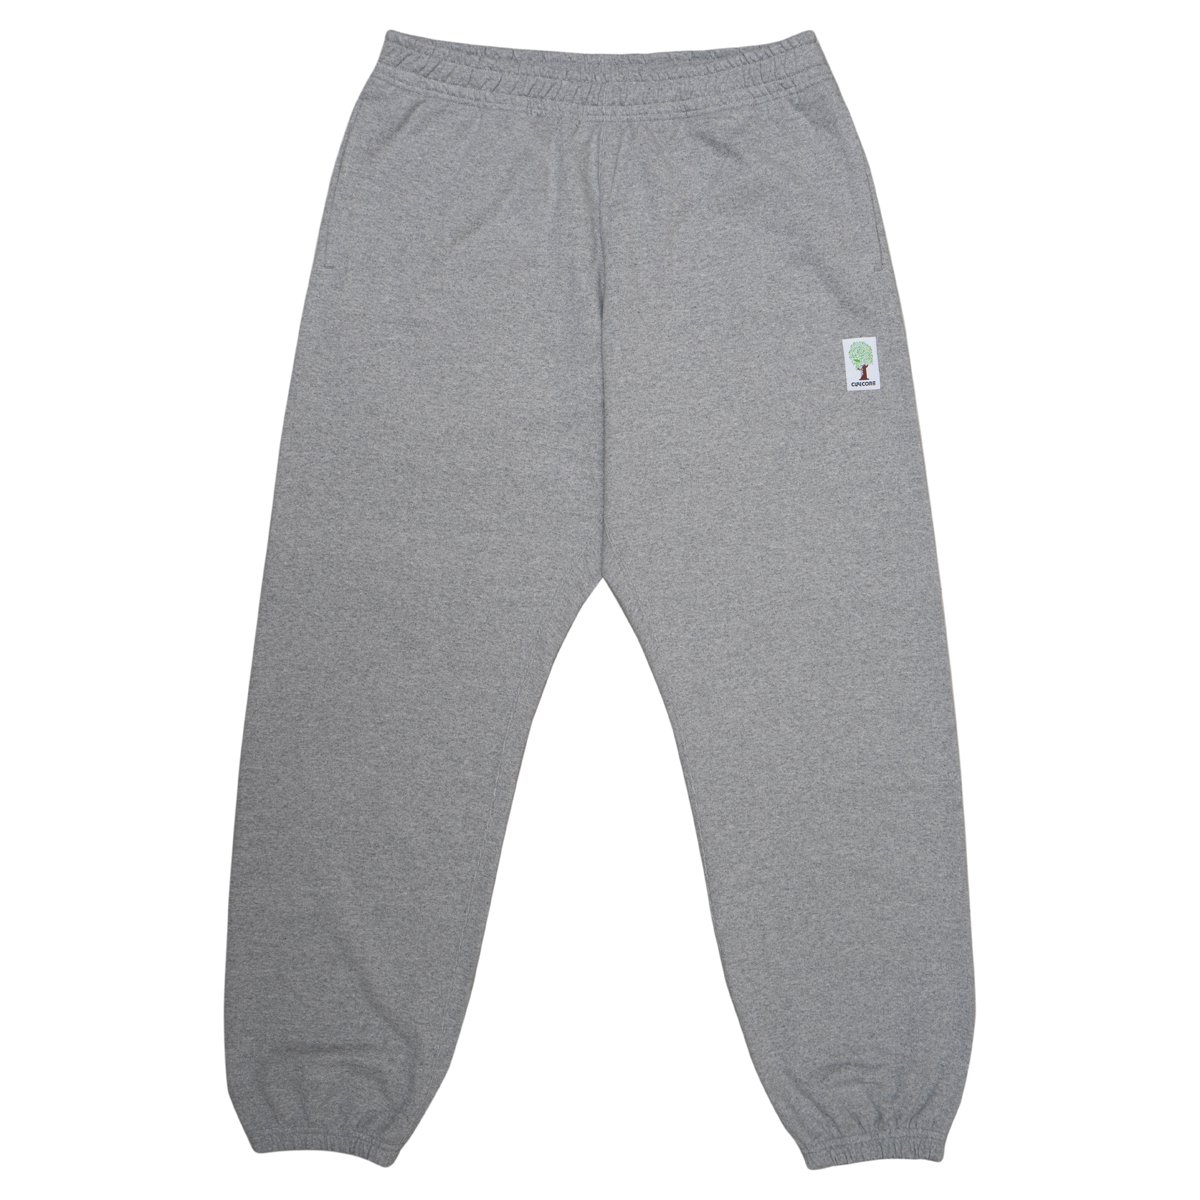 Forward Weave Pants - Grey - CUP AND CONE